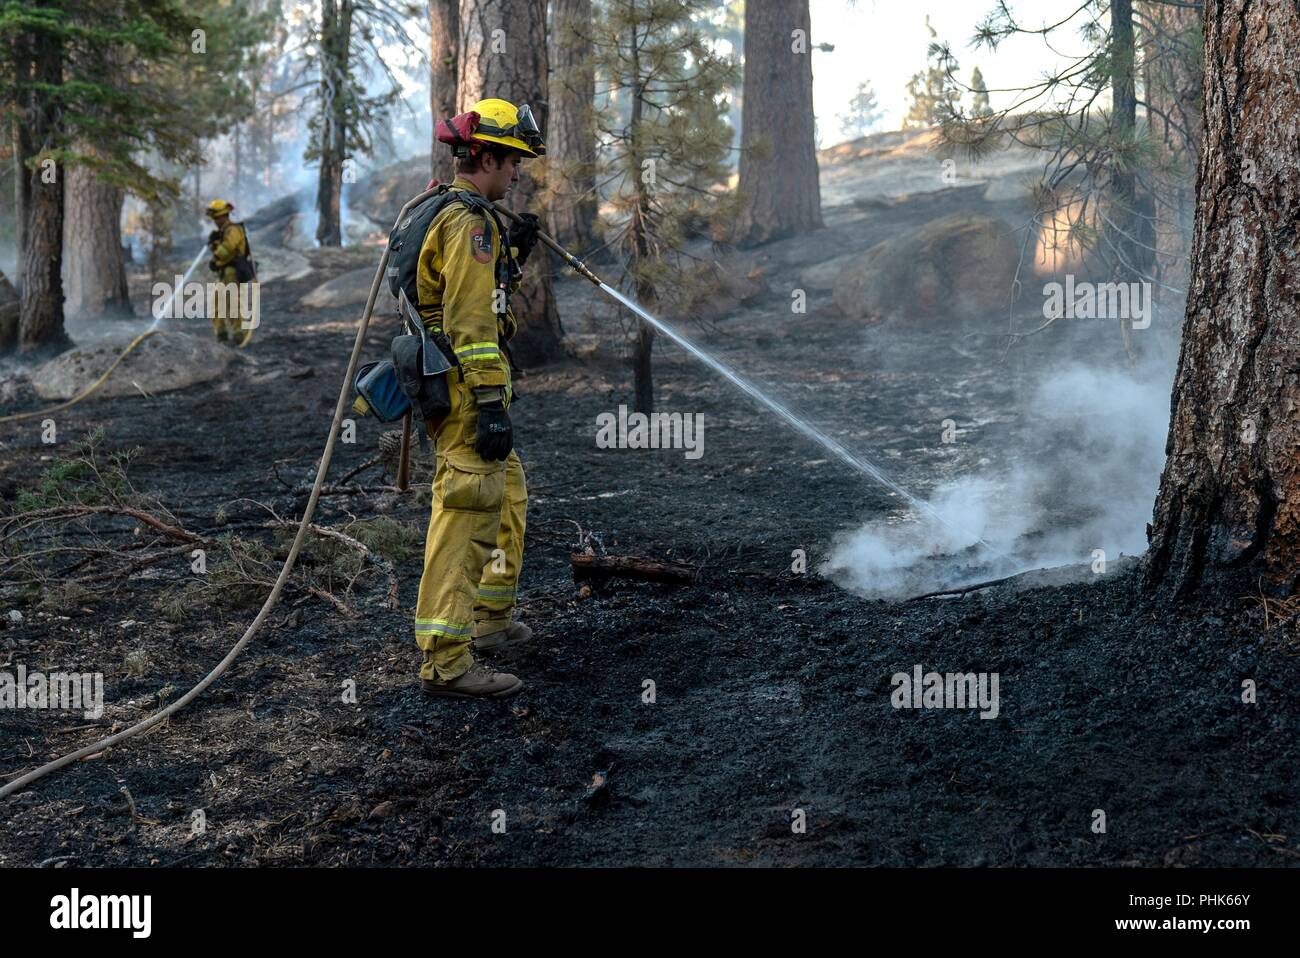 Cal State firefighters, work dousing embers at the Donnell Fire in Stanislaus National Forest August 12, 2018 near Sonora, California. The wildfire burned 36,335 acres and destroyed 54 major structures across Northern California. Stock Photo